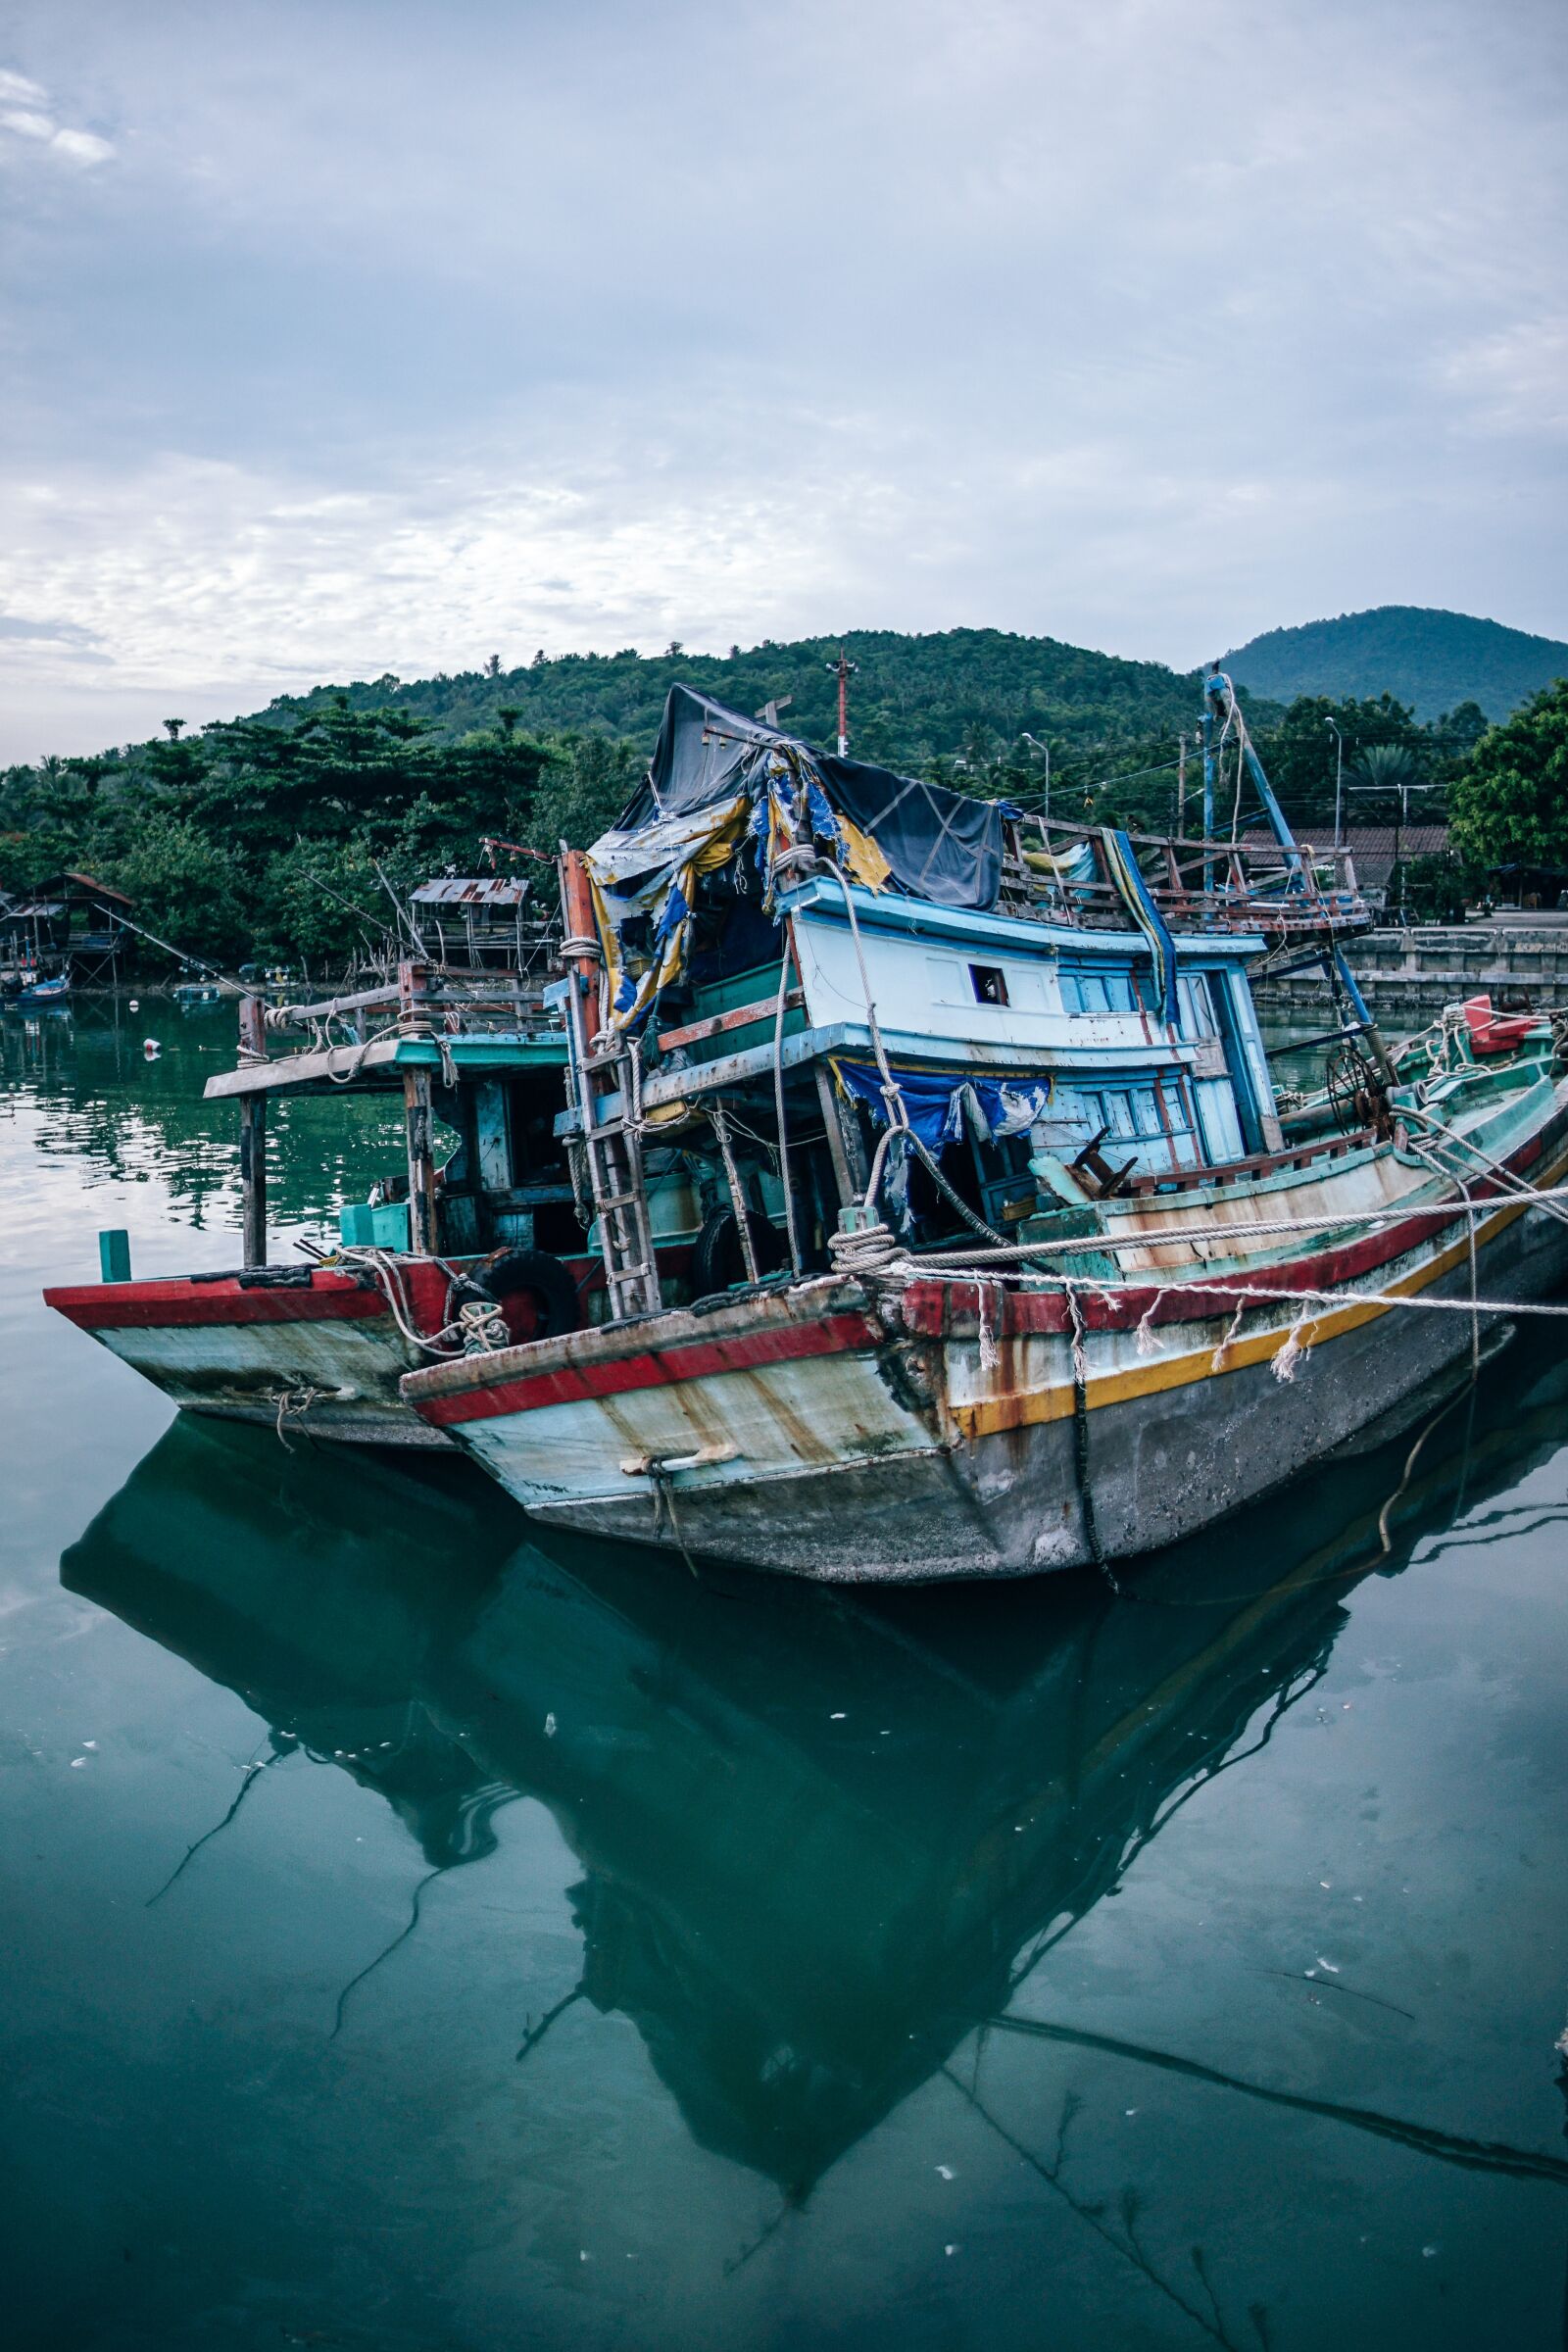 Sony a7 II sample photo. Boats, colorful, community photography